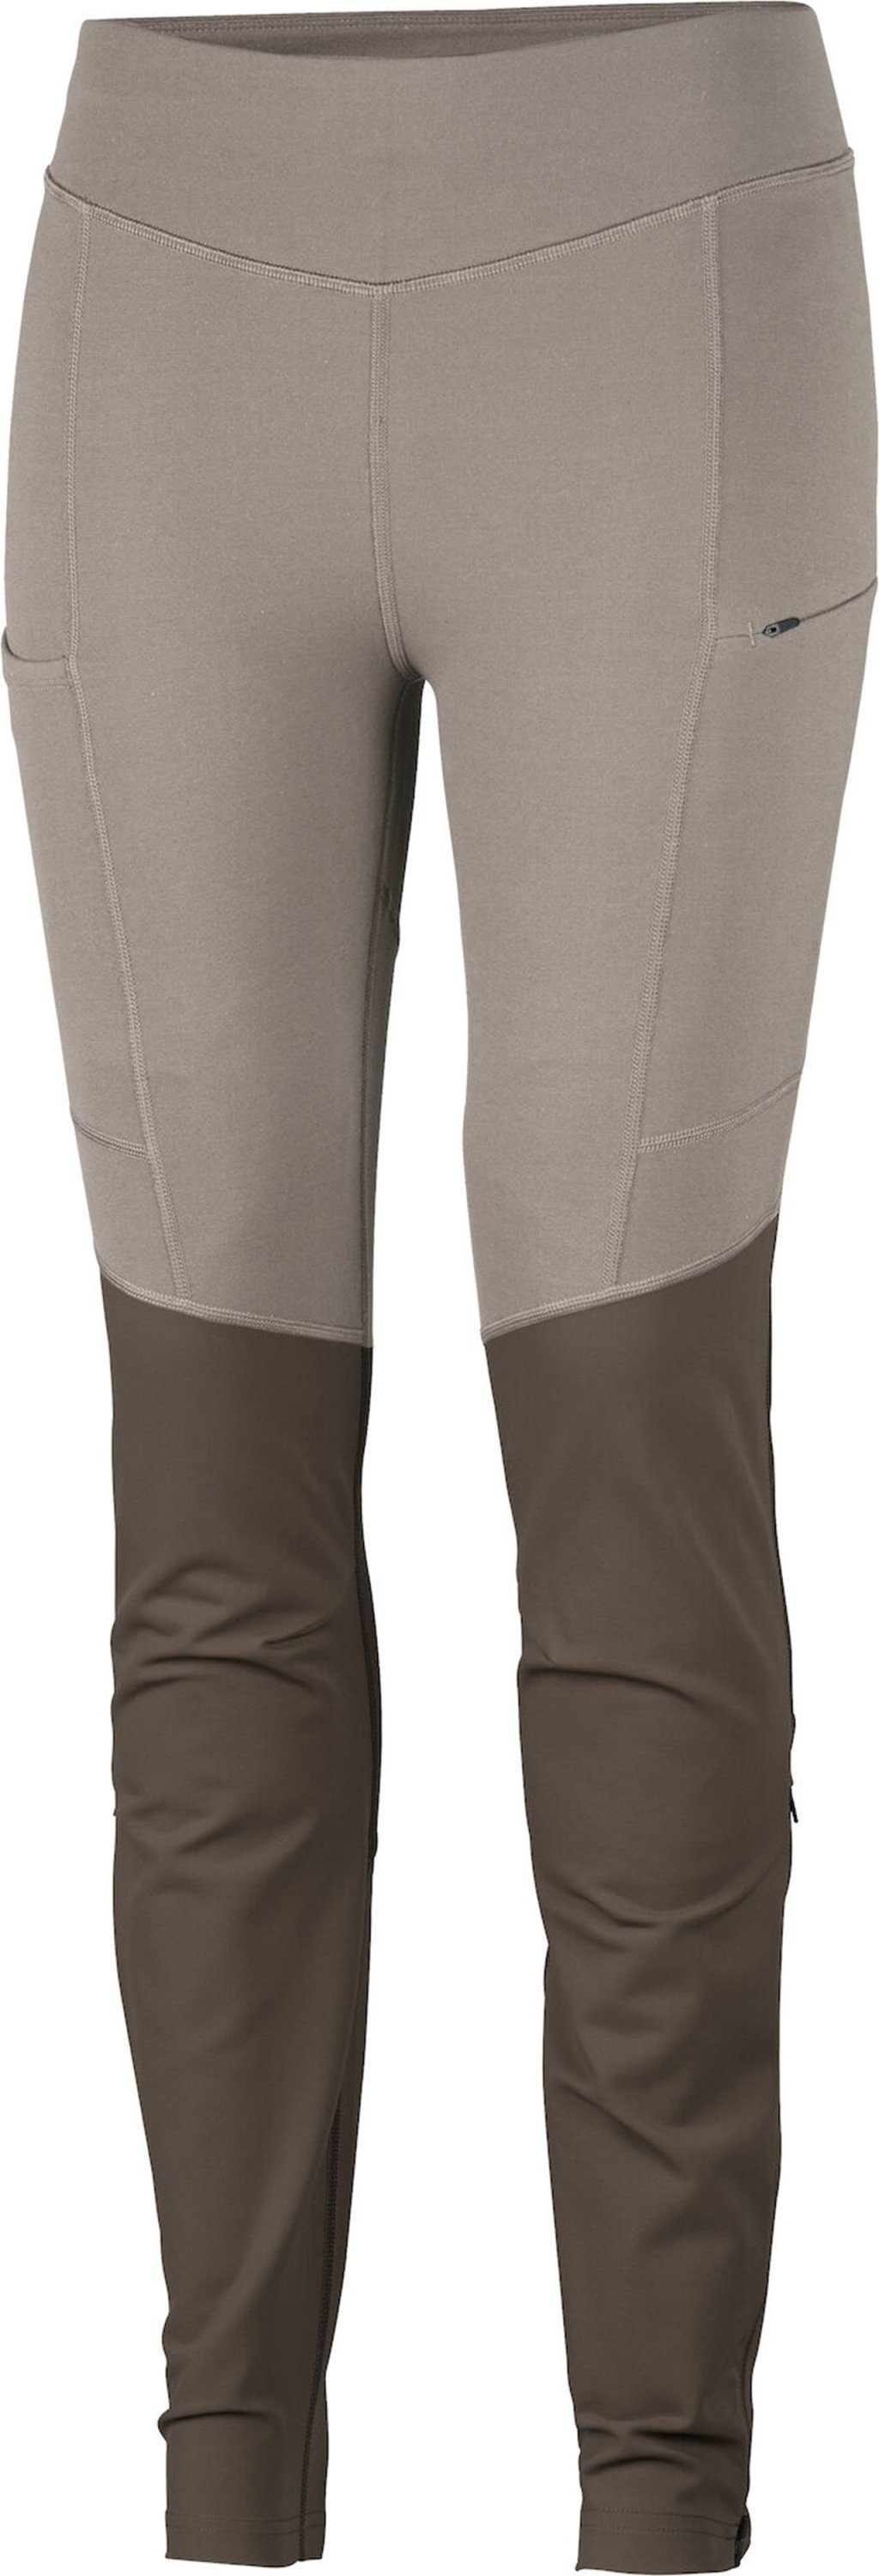 Lundhags Outdoorhose Tausa Ws Tight